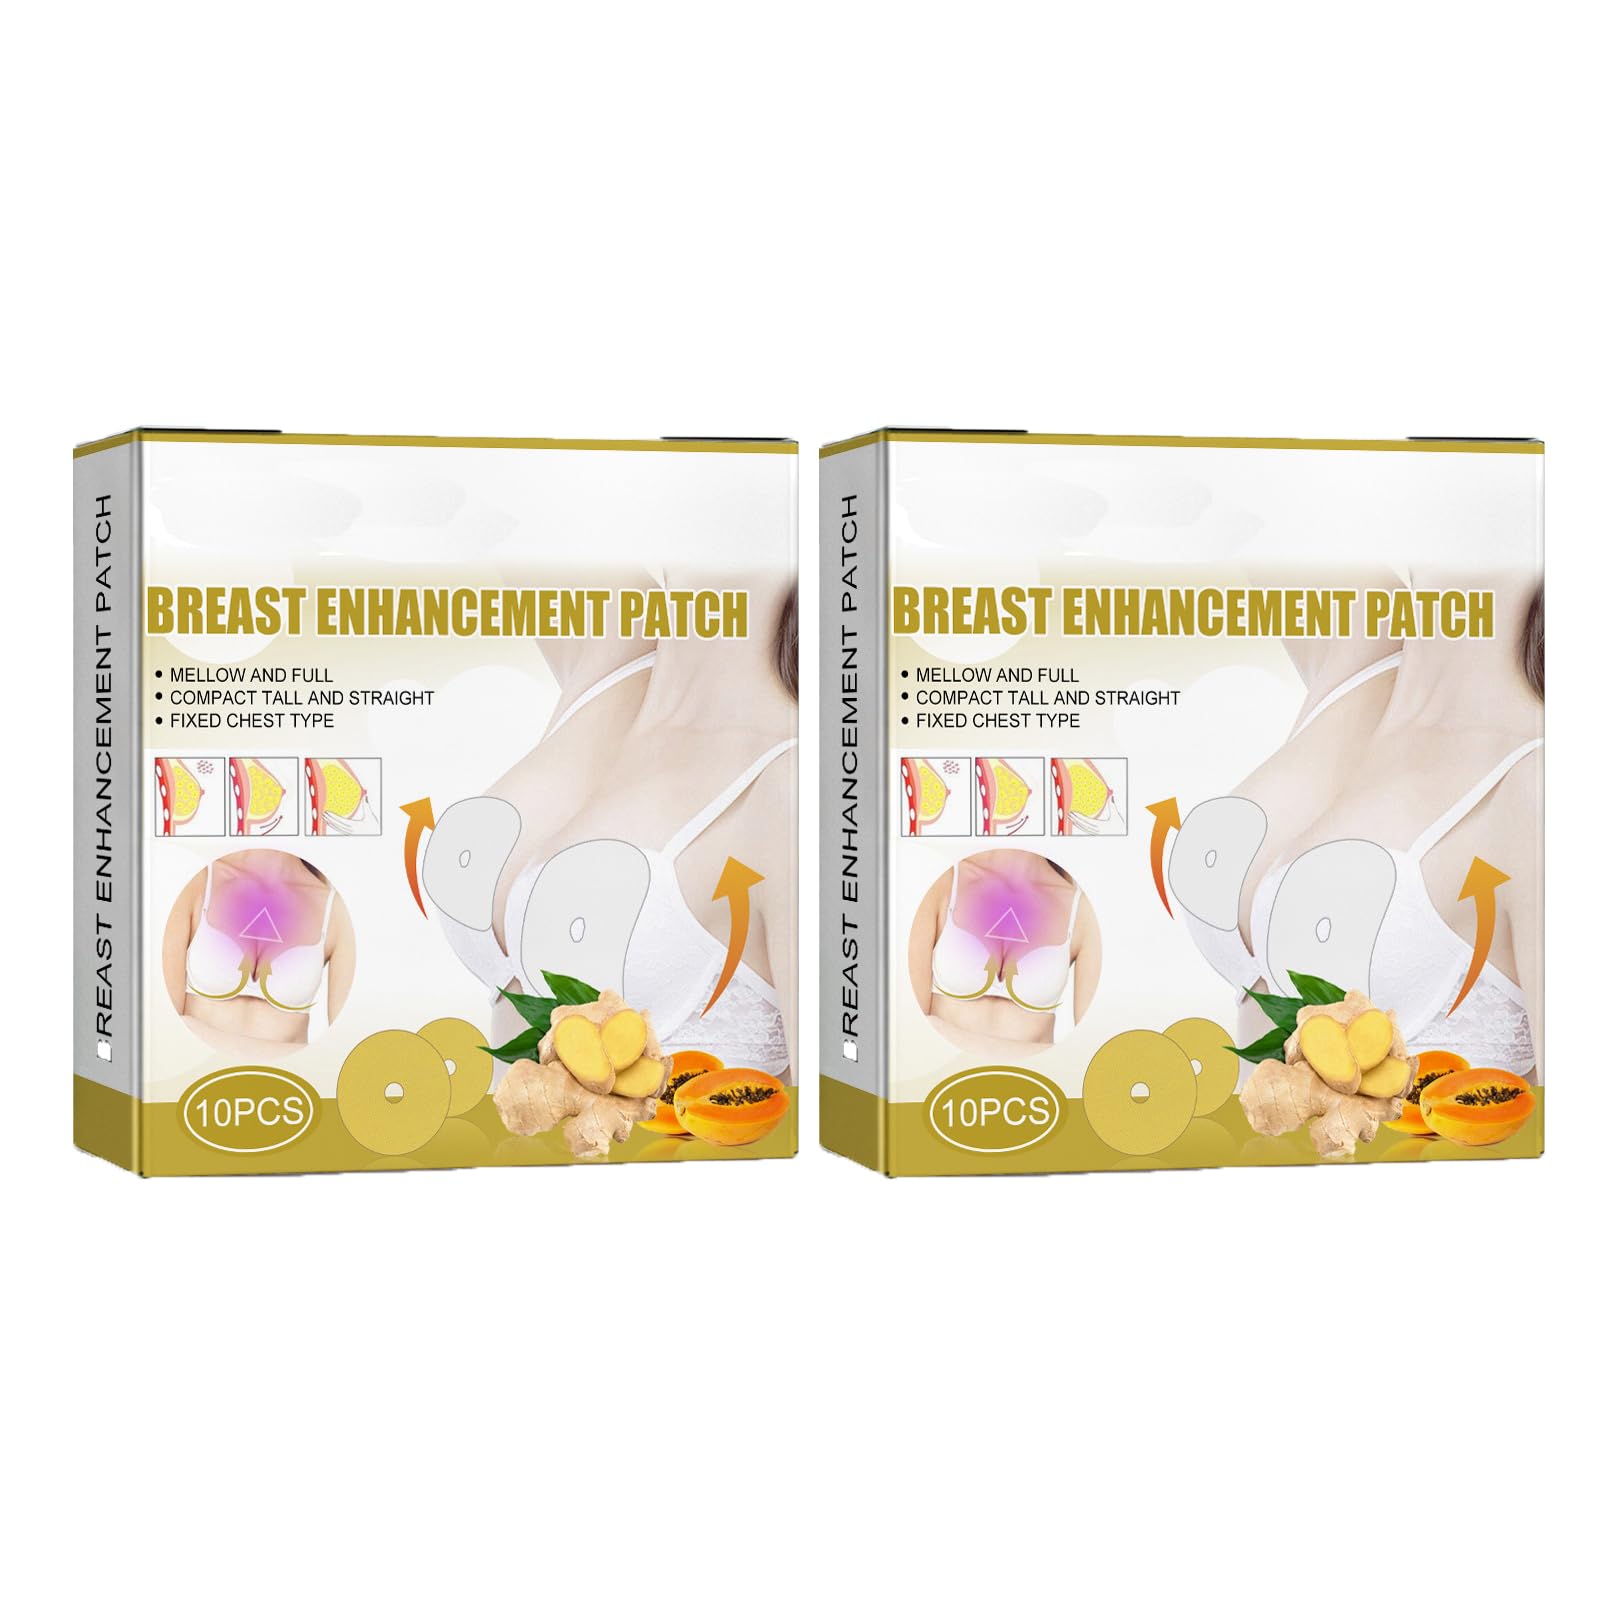 10pcs Breast Enhancement Patch For Firming, Lifting And Enlarging